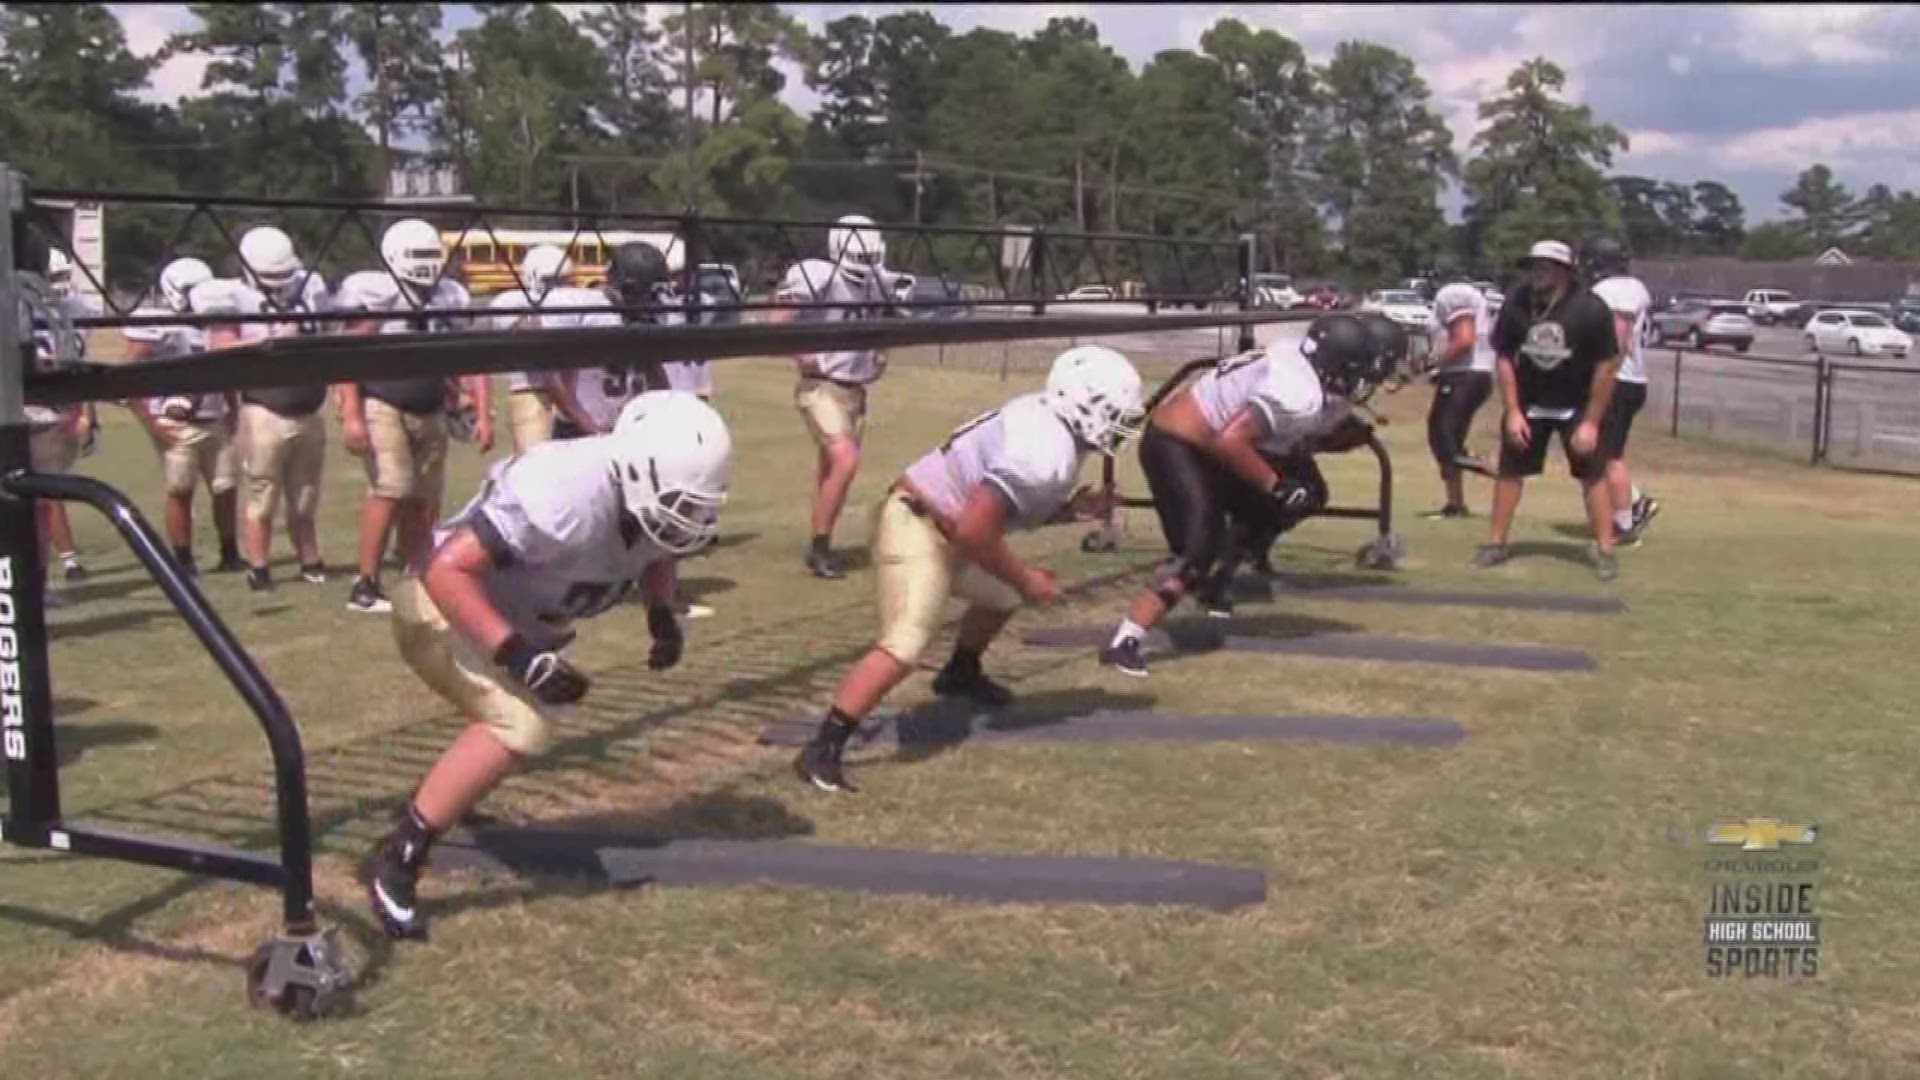 This week's Chevy Spotlight features the Conroe Tigers.